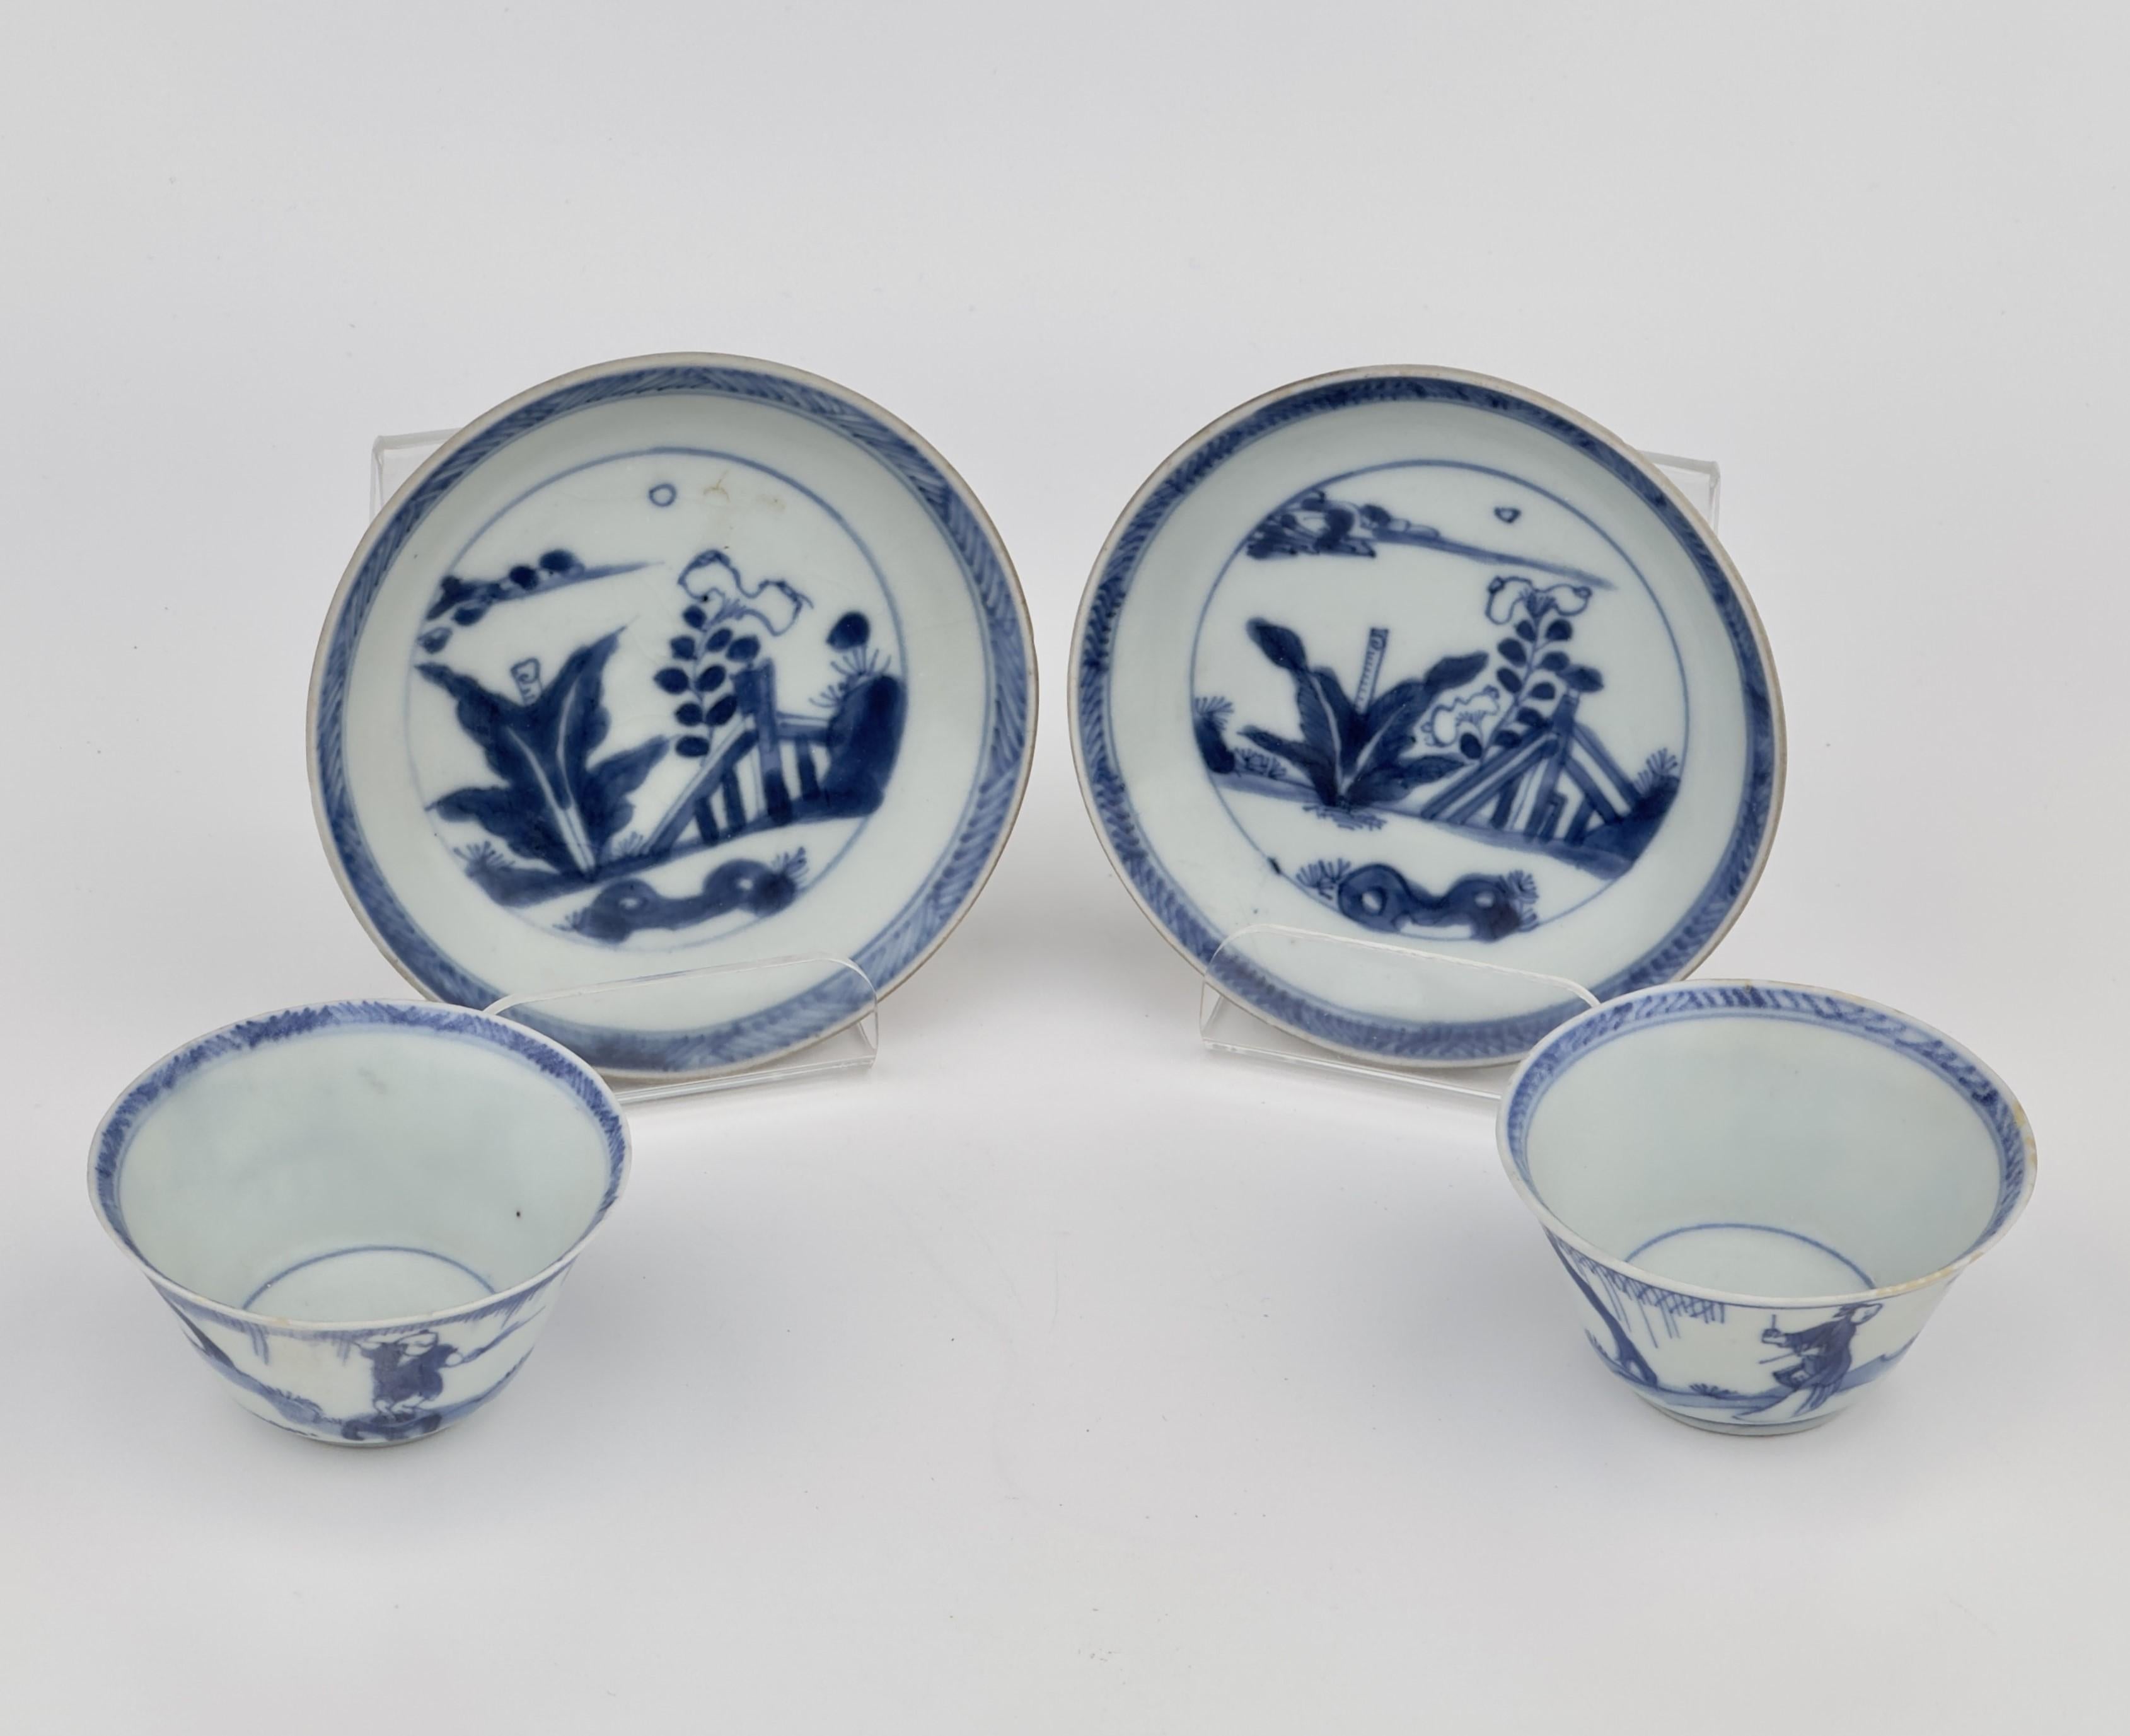 Chinese Export Blue and White Tea Set c 1725, Qing Dynasty, Yongzheng Reign For Sale